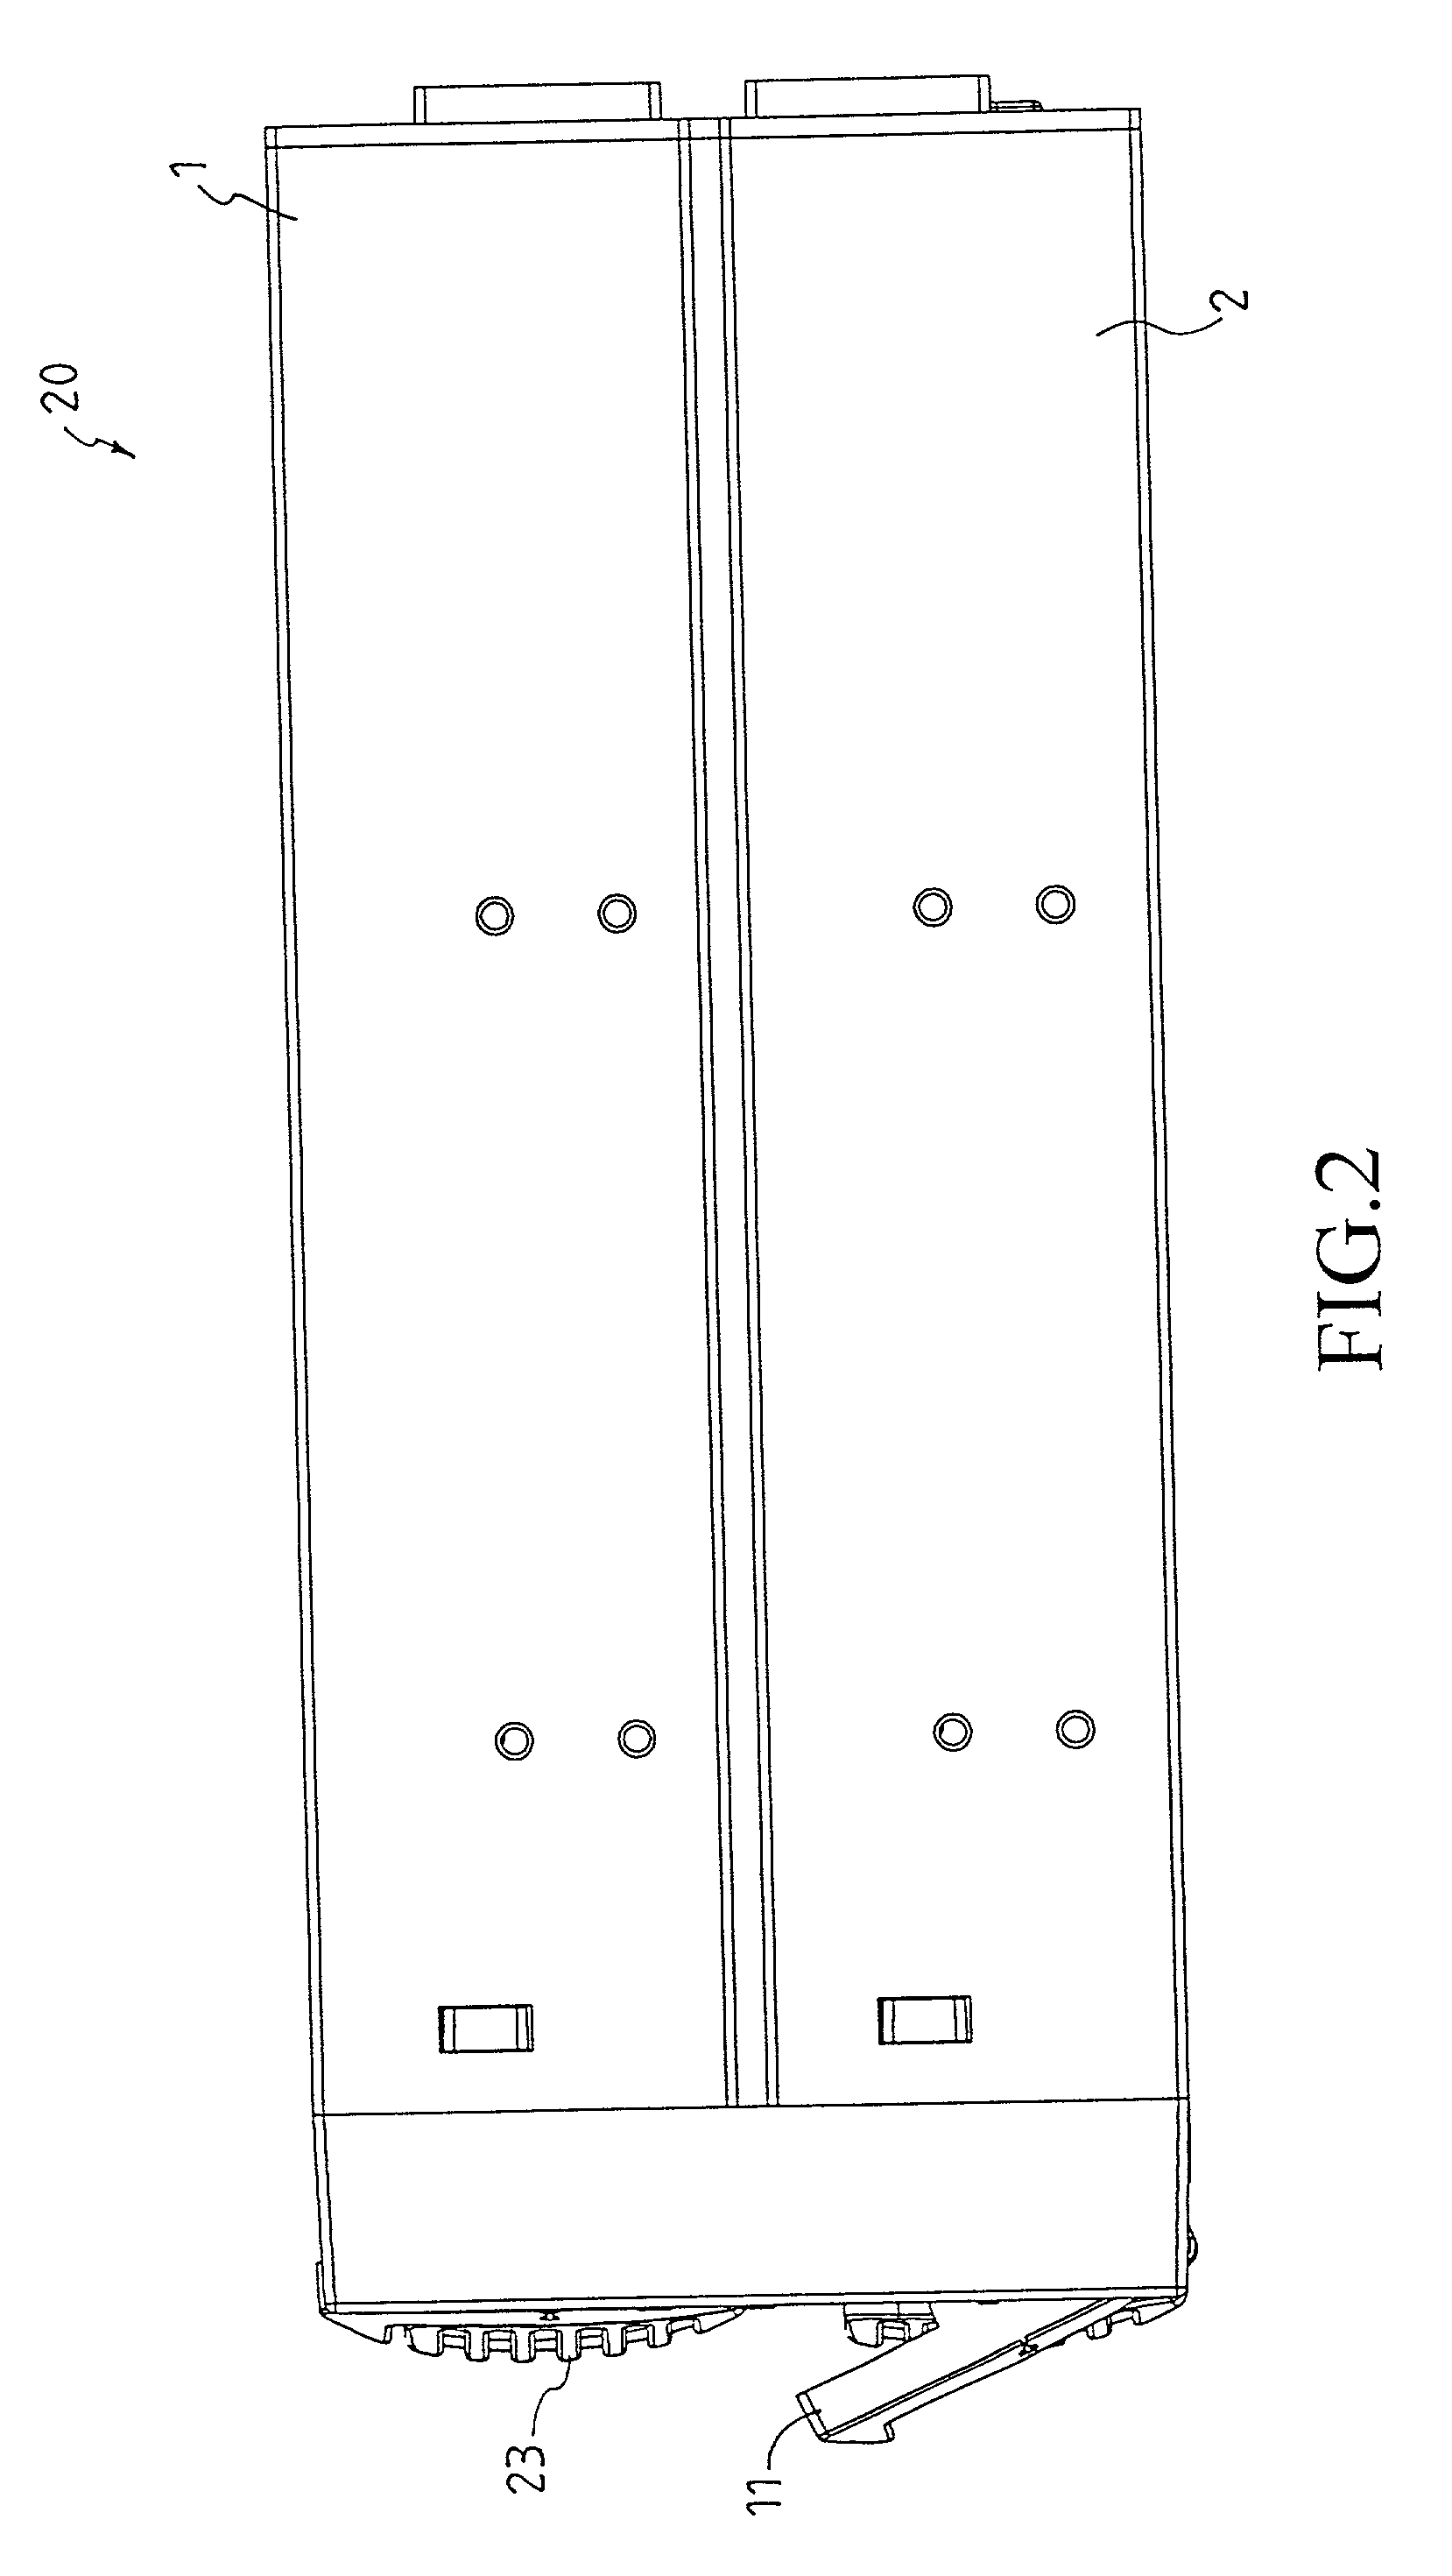 Automated disk-ejection apparatus and disk array having the same